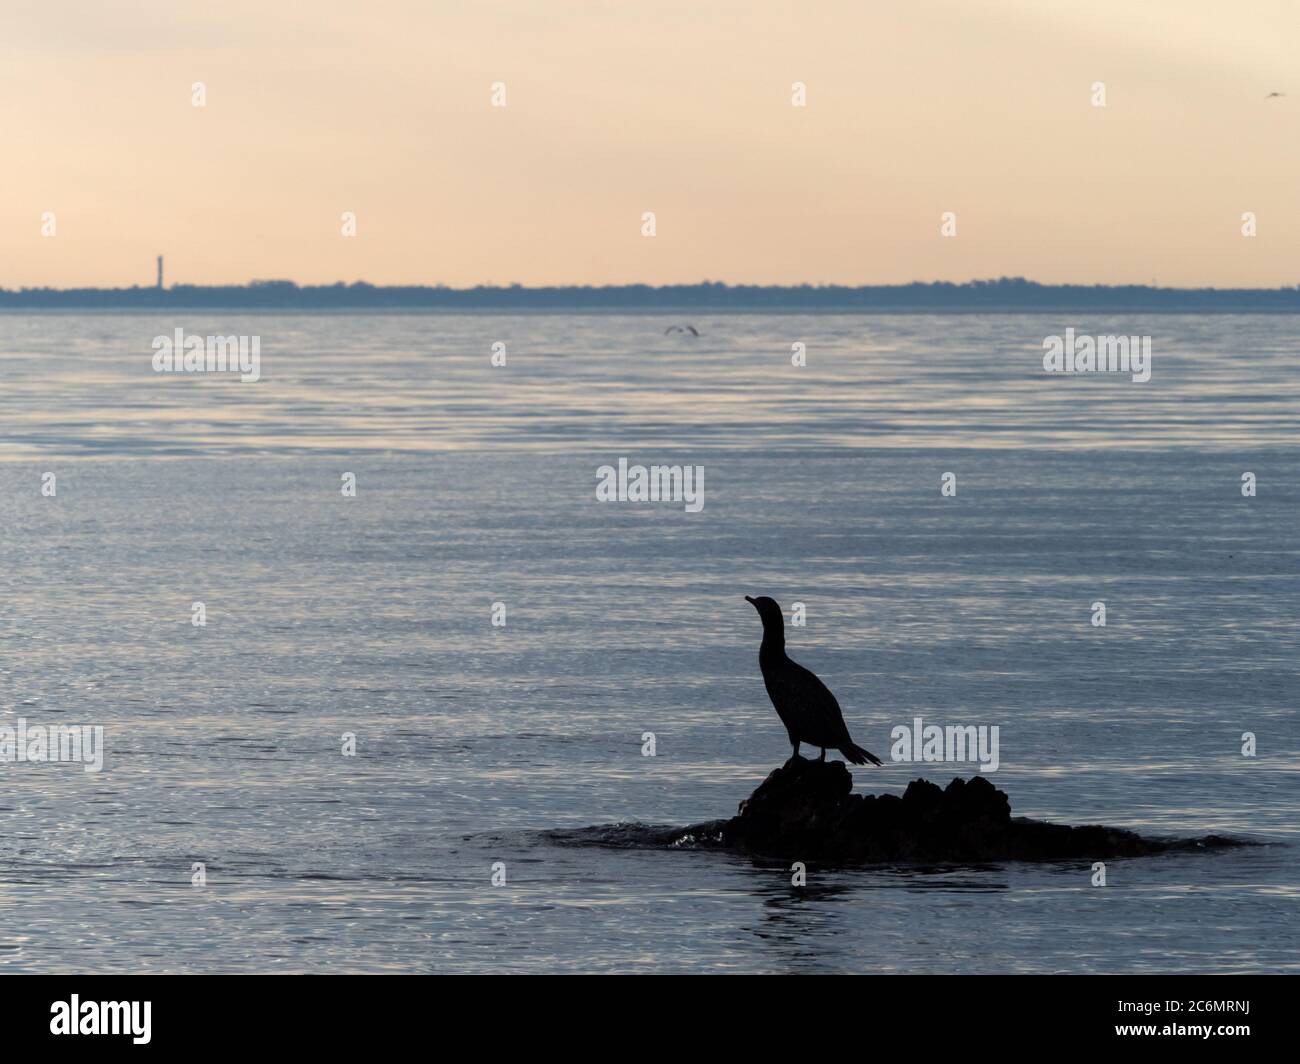 A seabird silhouetted against the ocean as it looks out across Port Phillip Bay Stock Photo